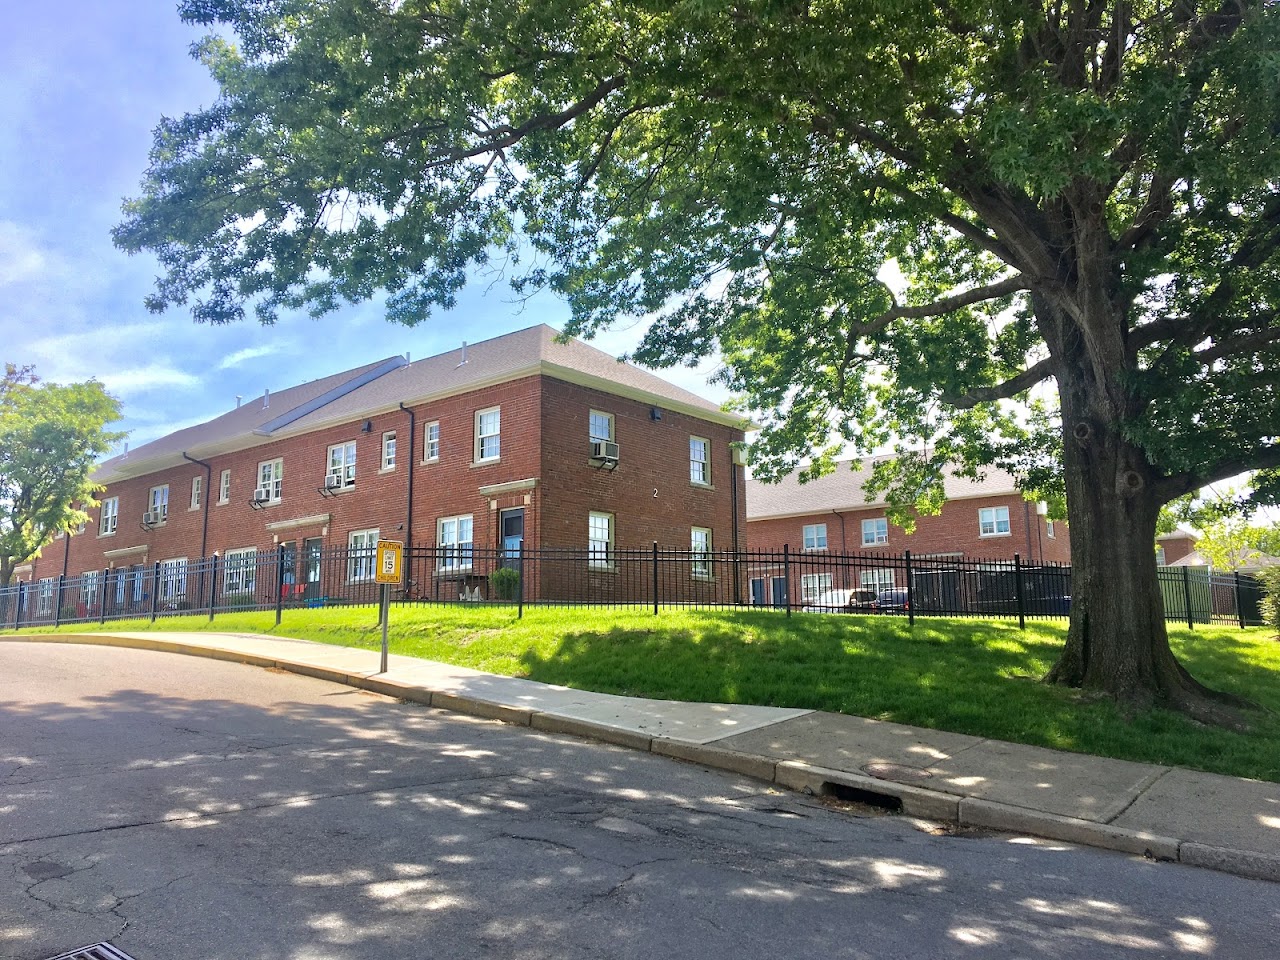 Photo of PROSPECT HEIGHTS III. Affordable housing located at PROSPECT STREET PAWTUCKET, RI 02860